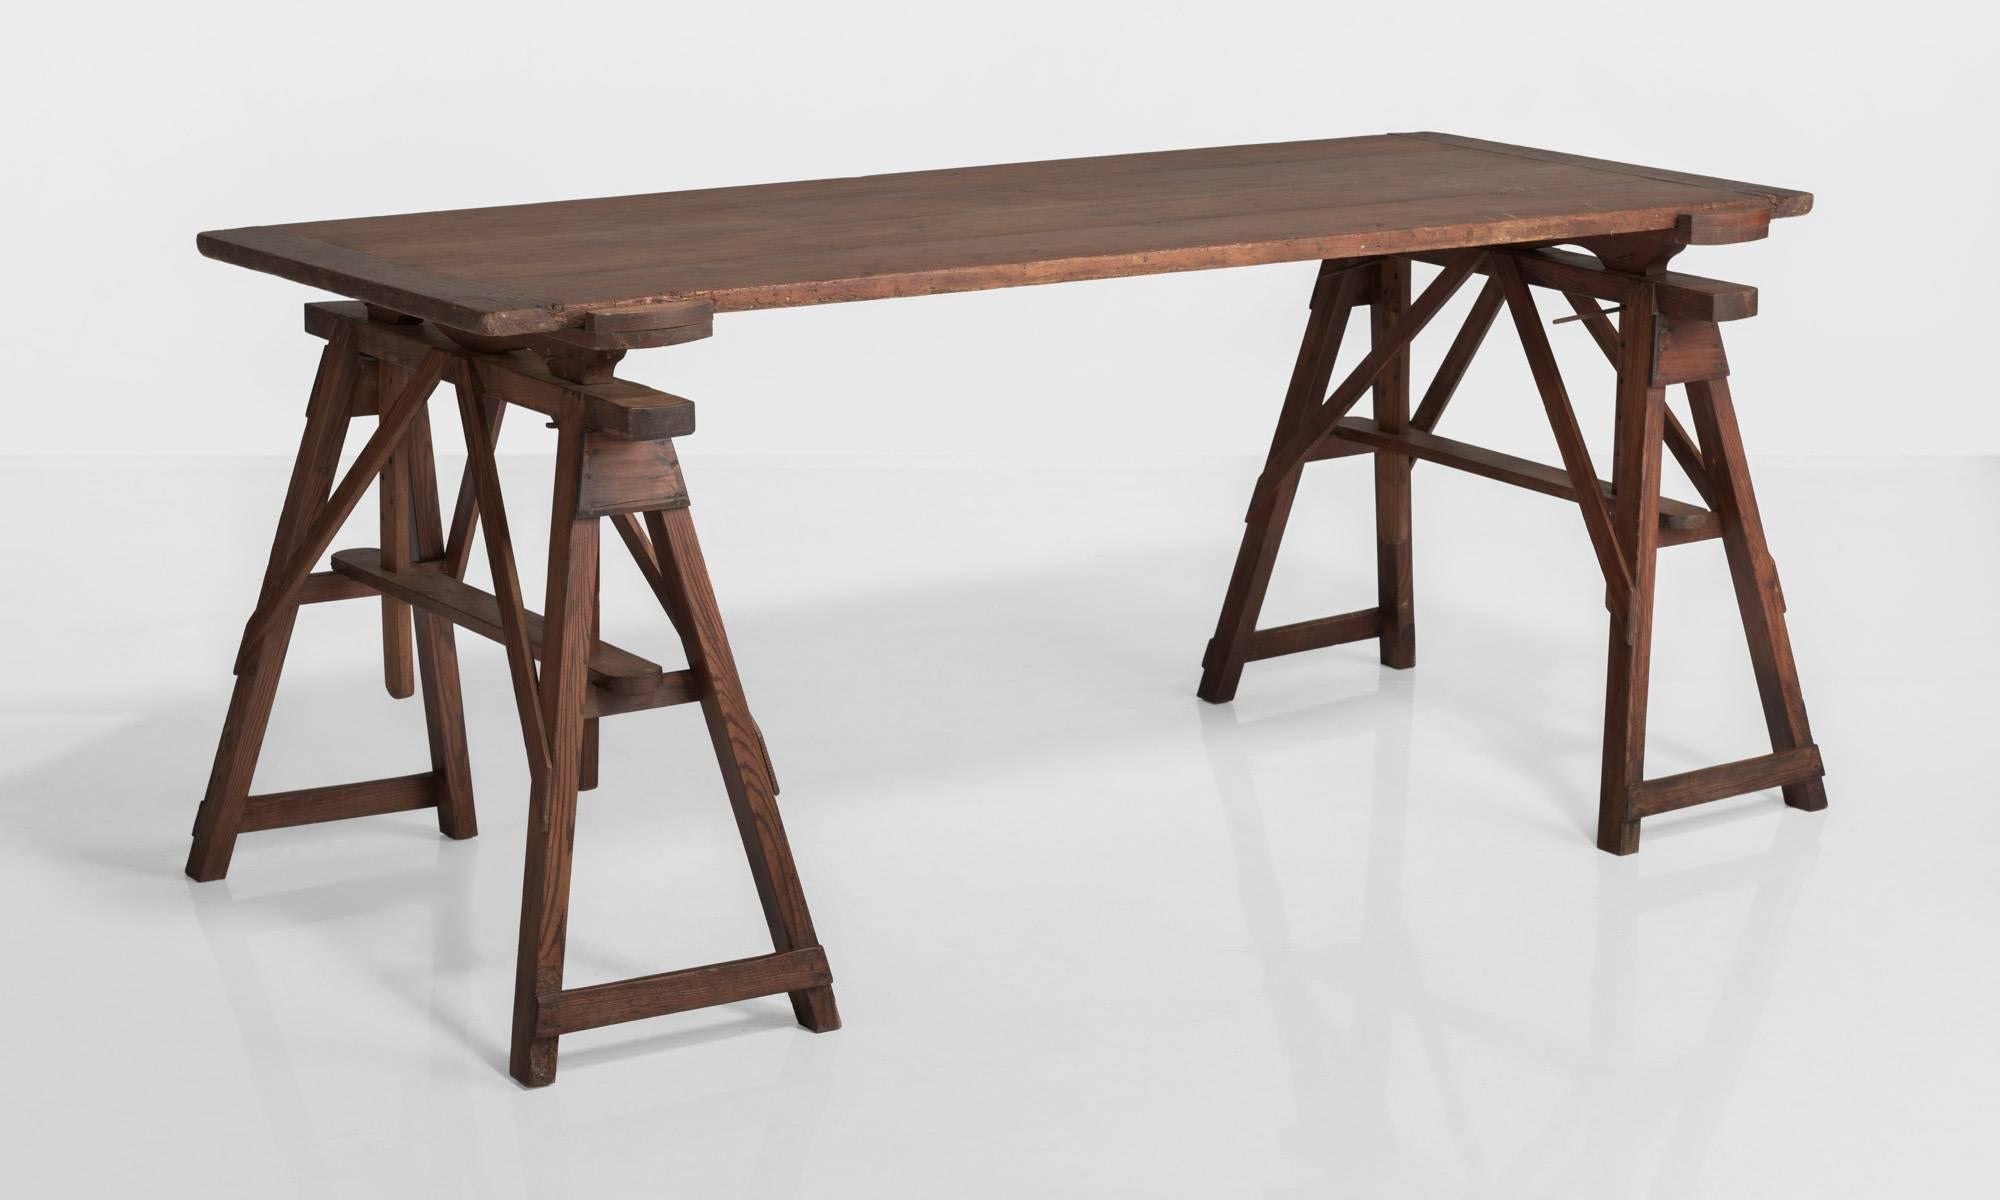 Pine Architect's Table, France circa, 1910.

Four plank pine top on pine stretchers. Wonderful color and adjustable surface height.